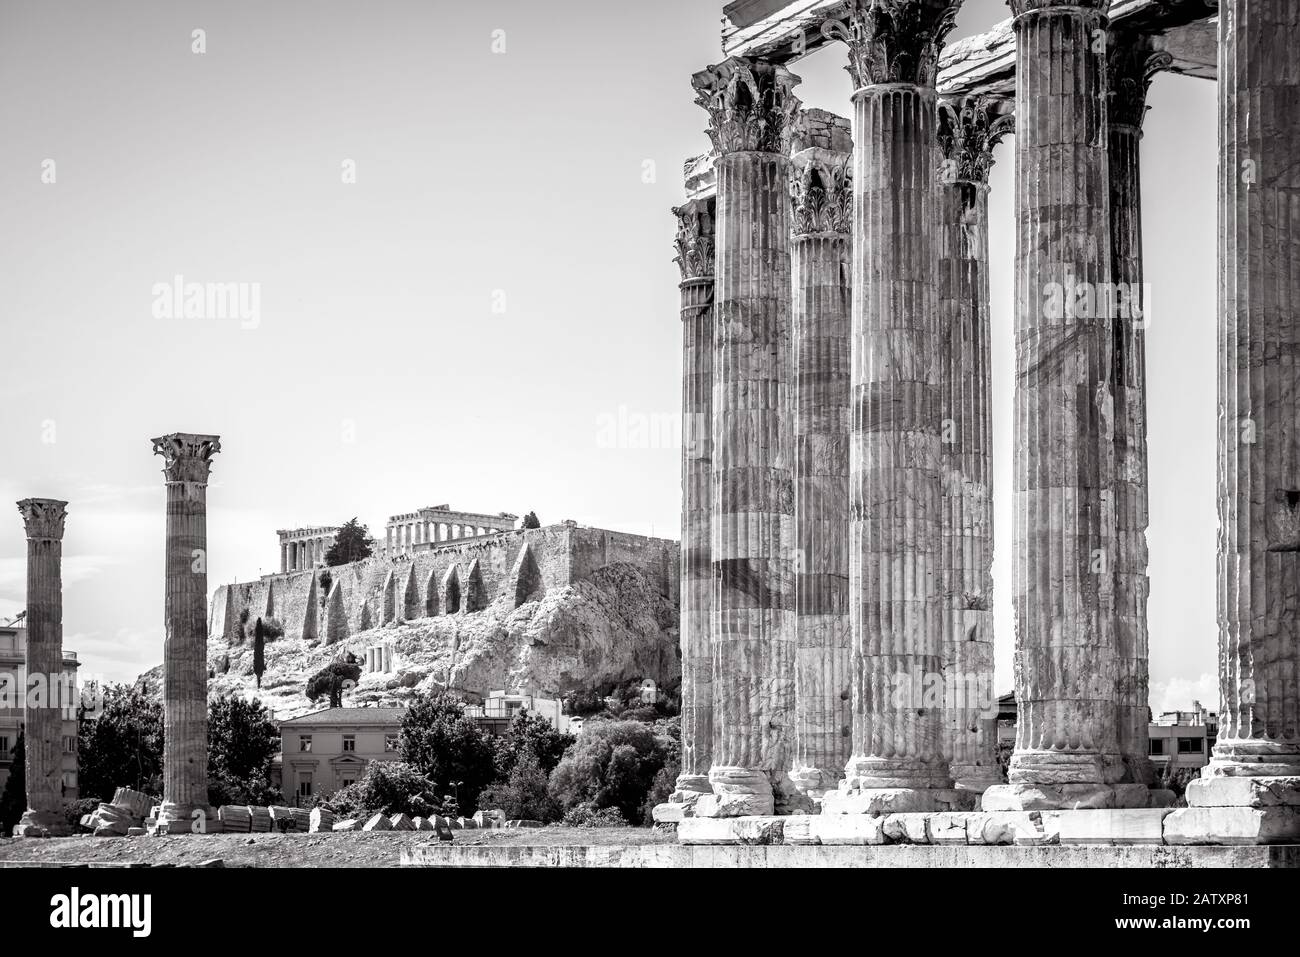 Temple of Olympian Zeus overlooking the famous Acropolis, Athens, Greece. Great Temple of Zeus or Olympieion is one of the main landmarks of Athens. A Stock Photo